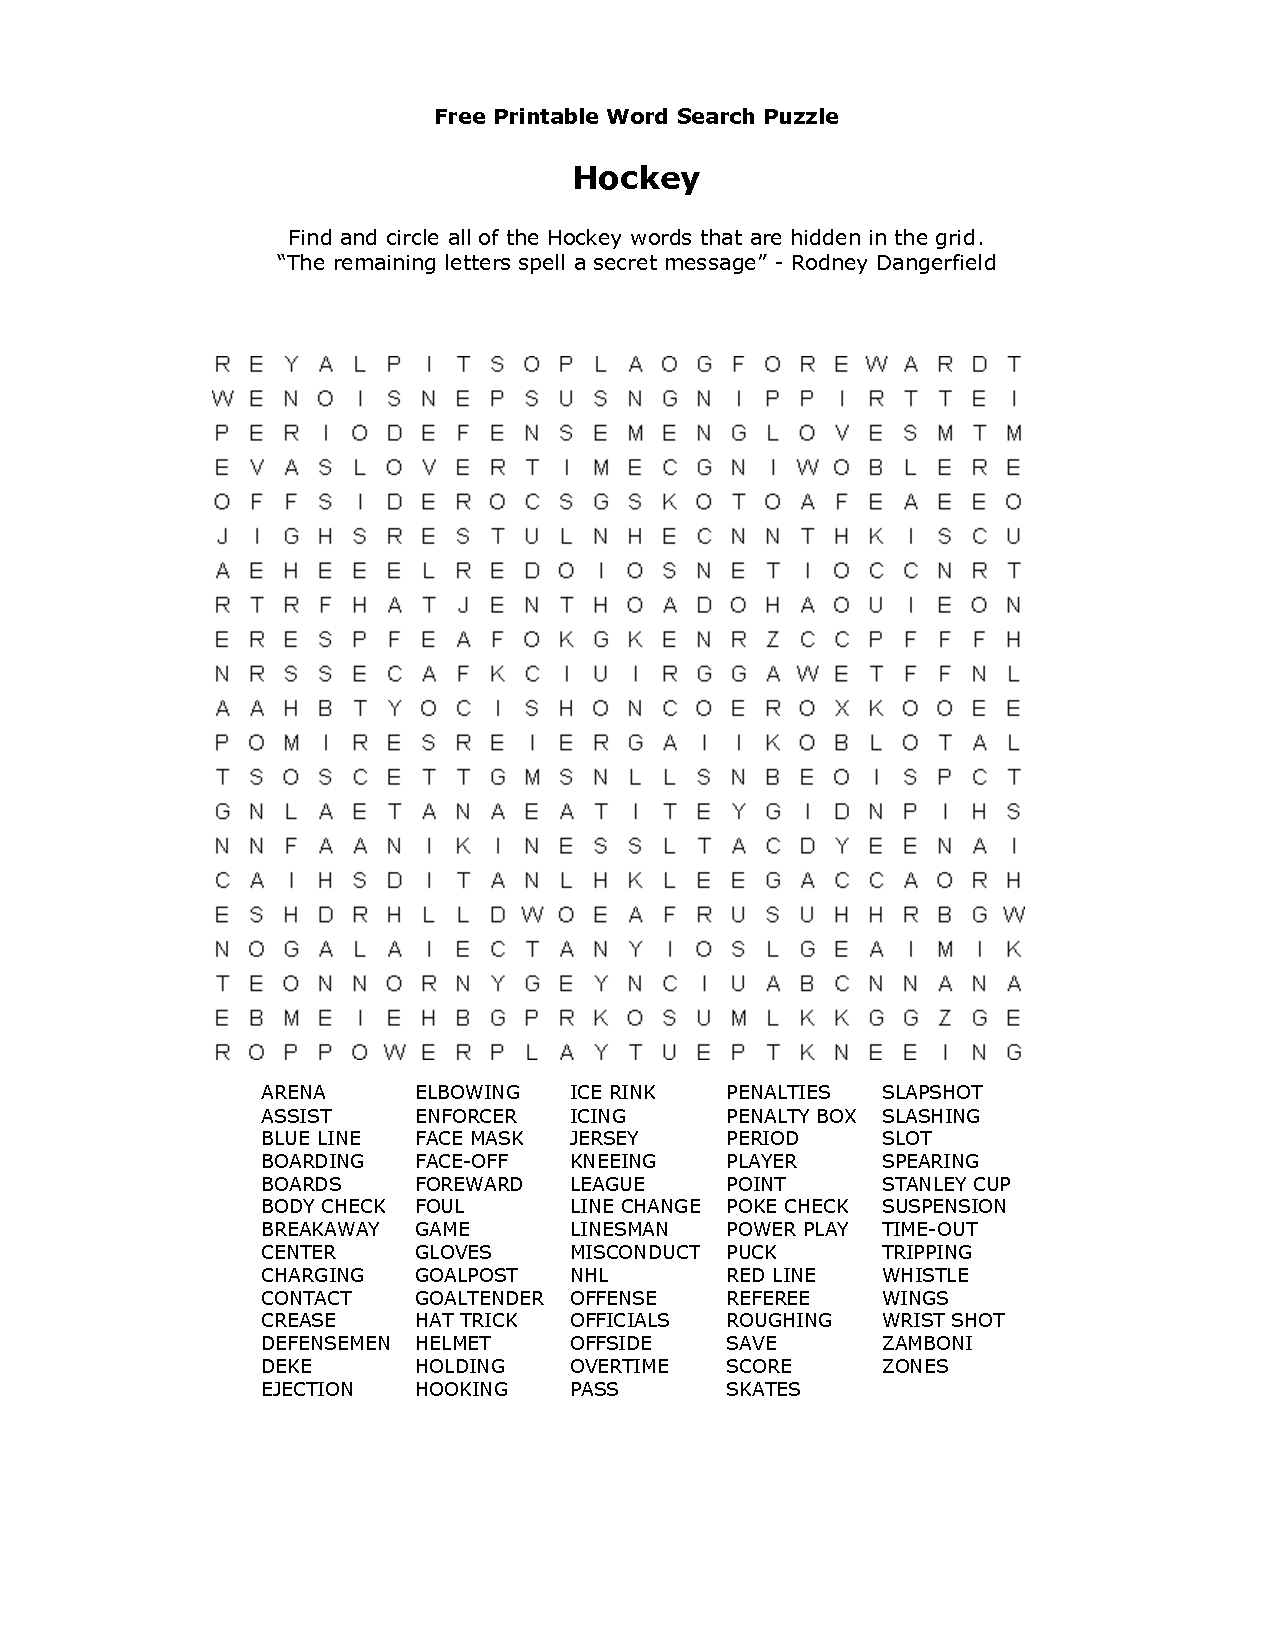 Free Printable Word Searches | Free Printable Word Searches